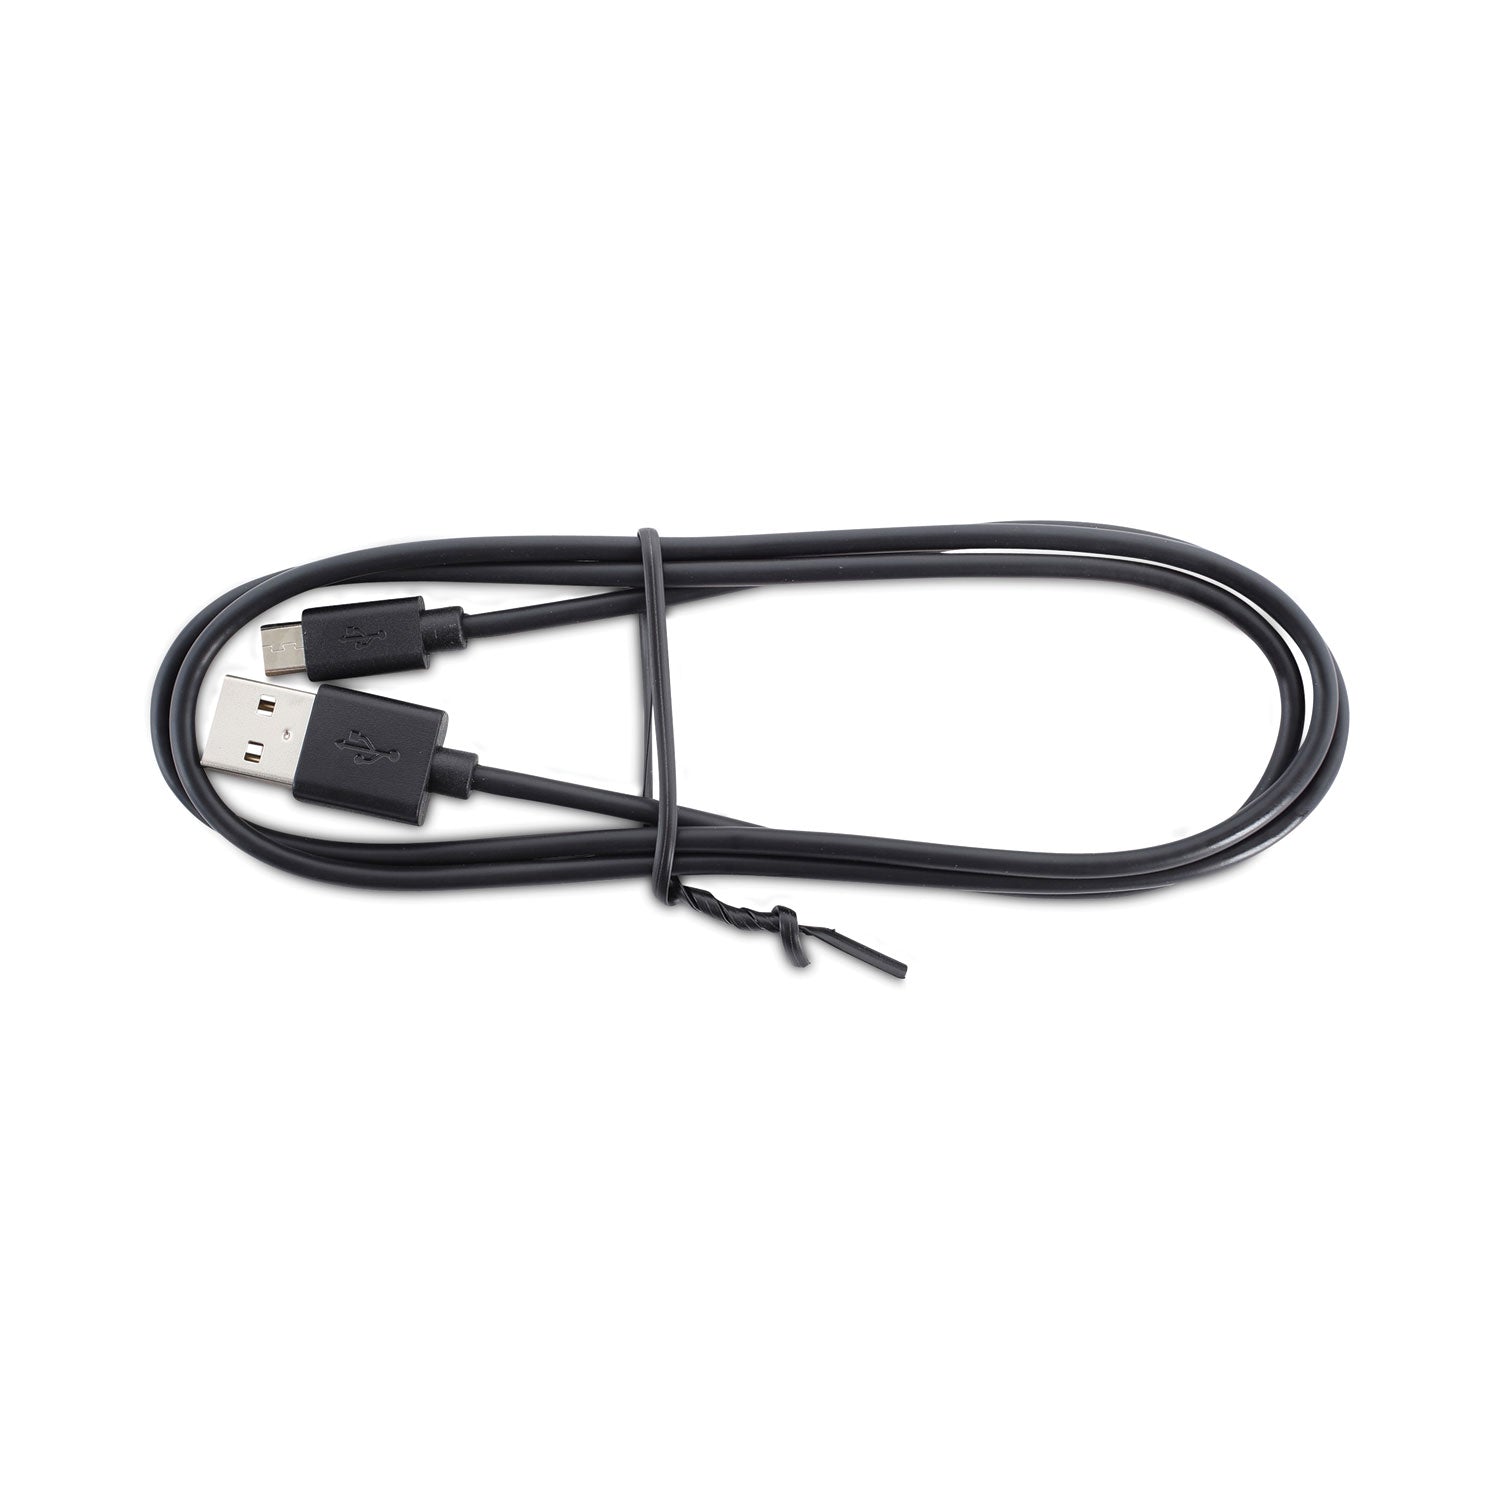 usb-to-micro-usb-cable-3-ft-black_ivr30006 - 1